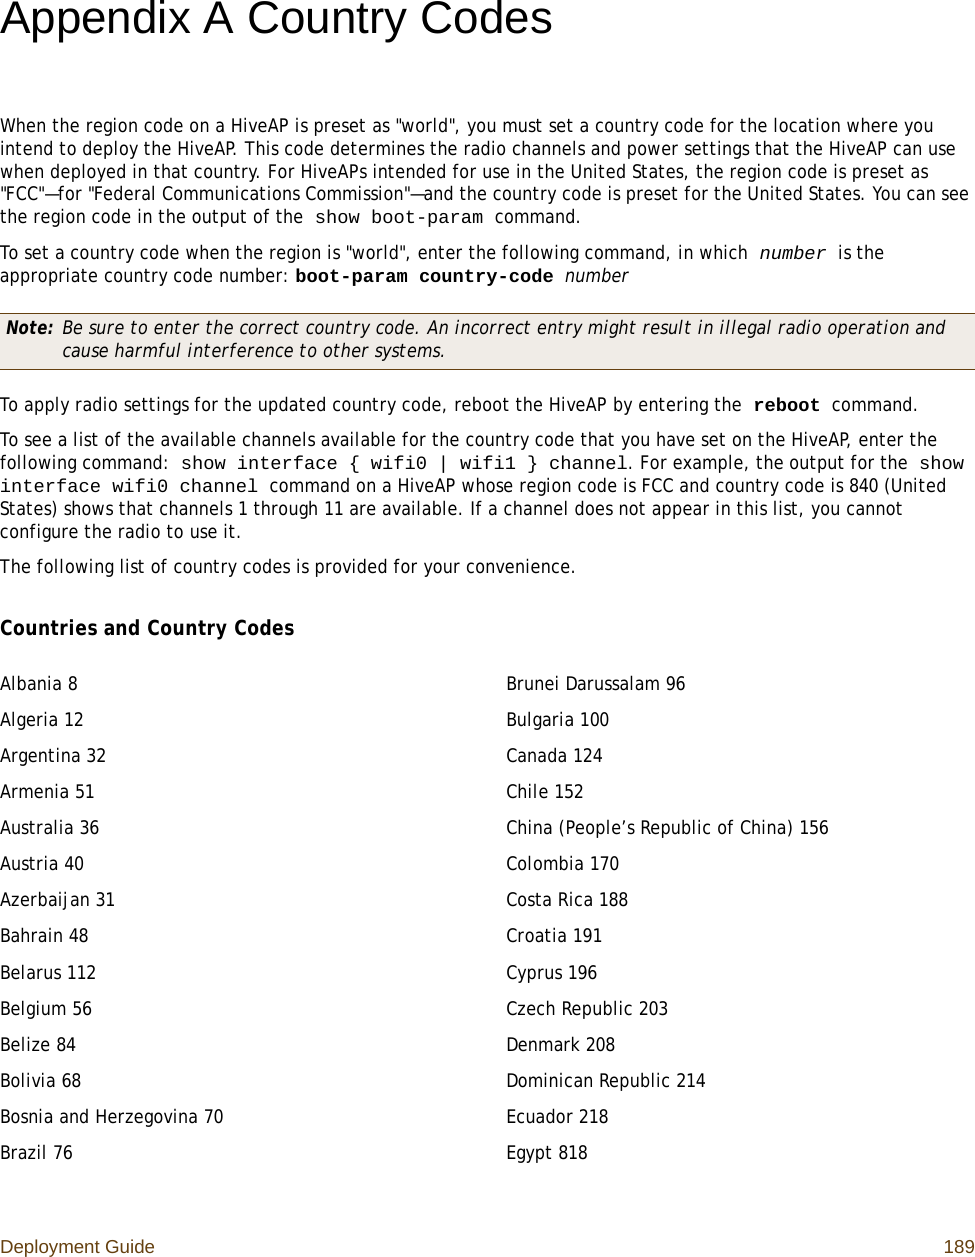 Deployment Guide 189Appendix A Country CodesWhen the region code on a HiveAP is preset as &quot;world&quot;, you must set a country code for the location where you intend to deploy the HiveAP. This code determines the radio channels and power settings that the HiveAP can use when deployed in that country. For HiveAPs intended for use in the United States, the region code is preset as &quot;FCC&quot;—for &quot;Federal Communications Commission&quot;—and the country code is preset for the United States. You can see the region code in the output of the show boot-param command.To set a country code when the region is &quot;world&quot;, enter the following command, in which number is the appropriate country code number: boot-param country-code numberTo apply radio settings for the updated country code, reboot the HiveAP by entering the reboot command. To see a list of the available channels available for the country code that you have set on the HiveAP, enter the following command: show interface { wifi0 | wifi1 } channel. For example, the output for the show interface wifi0 channel command on a HiveAP whose region code is FCC and country code is 840 (United States) shows that channels 1 through 11 are available. If a channel does not appear in this list, you cannot configure the radio to use it.The following list of country codes is provided for your convenience.Countries and Country CodesAlbania 8Algeria 12Argentina 32Armenia 51Australia 36Austria 40Azerbaijan 31Bahrain 48Belarus 112Belgium 56Belize 84Bolivia 68Bosnia and Herzegovina 70Brazil 76Brunei Darussalam 96Bulgaria 100Canada 124Chile 152China (People’s Republic of China) 156Colombia 170Costa Rica 188Croatia 191Cyprus 196Czech Republic 203Denmark 208Dominican Republic 214Ecuador 218Egypt 818Note: Be sure to enter the correct country code. An incorrect entry might result in illegal radio operation and cause harmful interference to other systems.